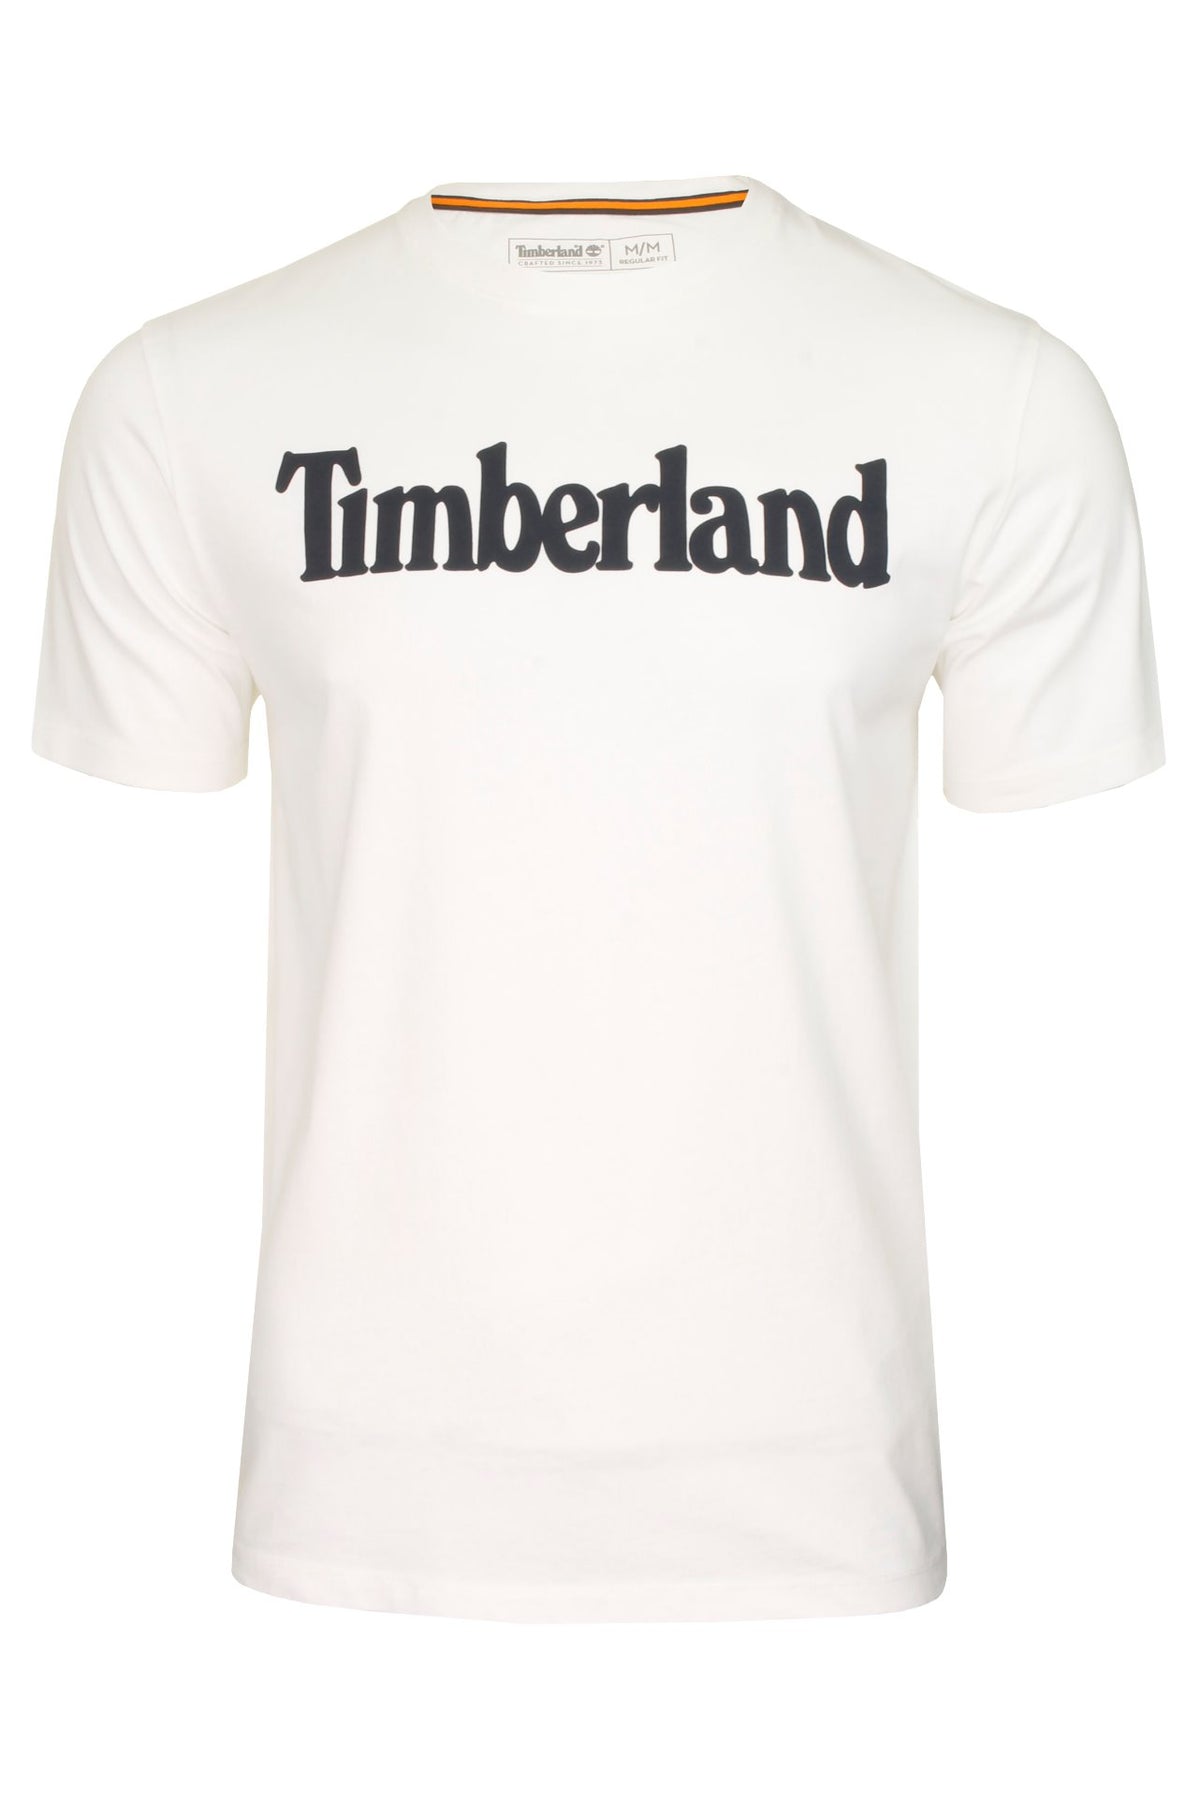 Timberland Mens Jersey T-Shirt 'Kennebec River Linea Tee', 01, Tb0A2C31, White